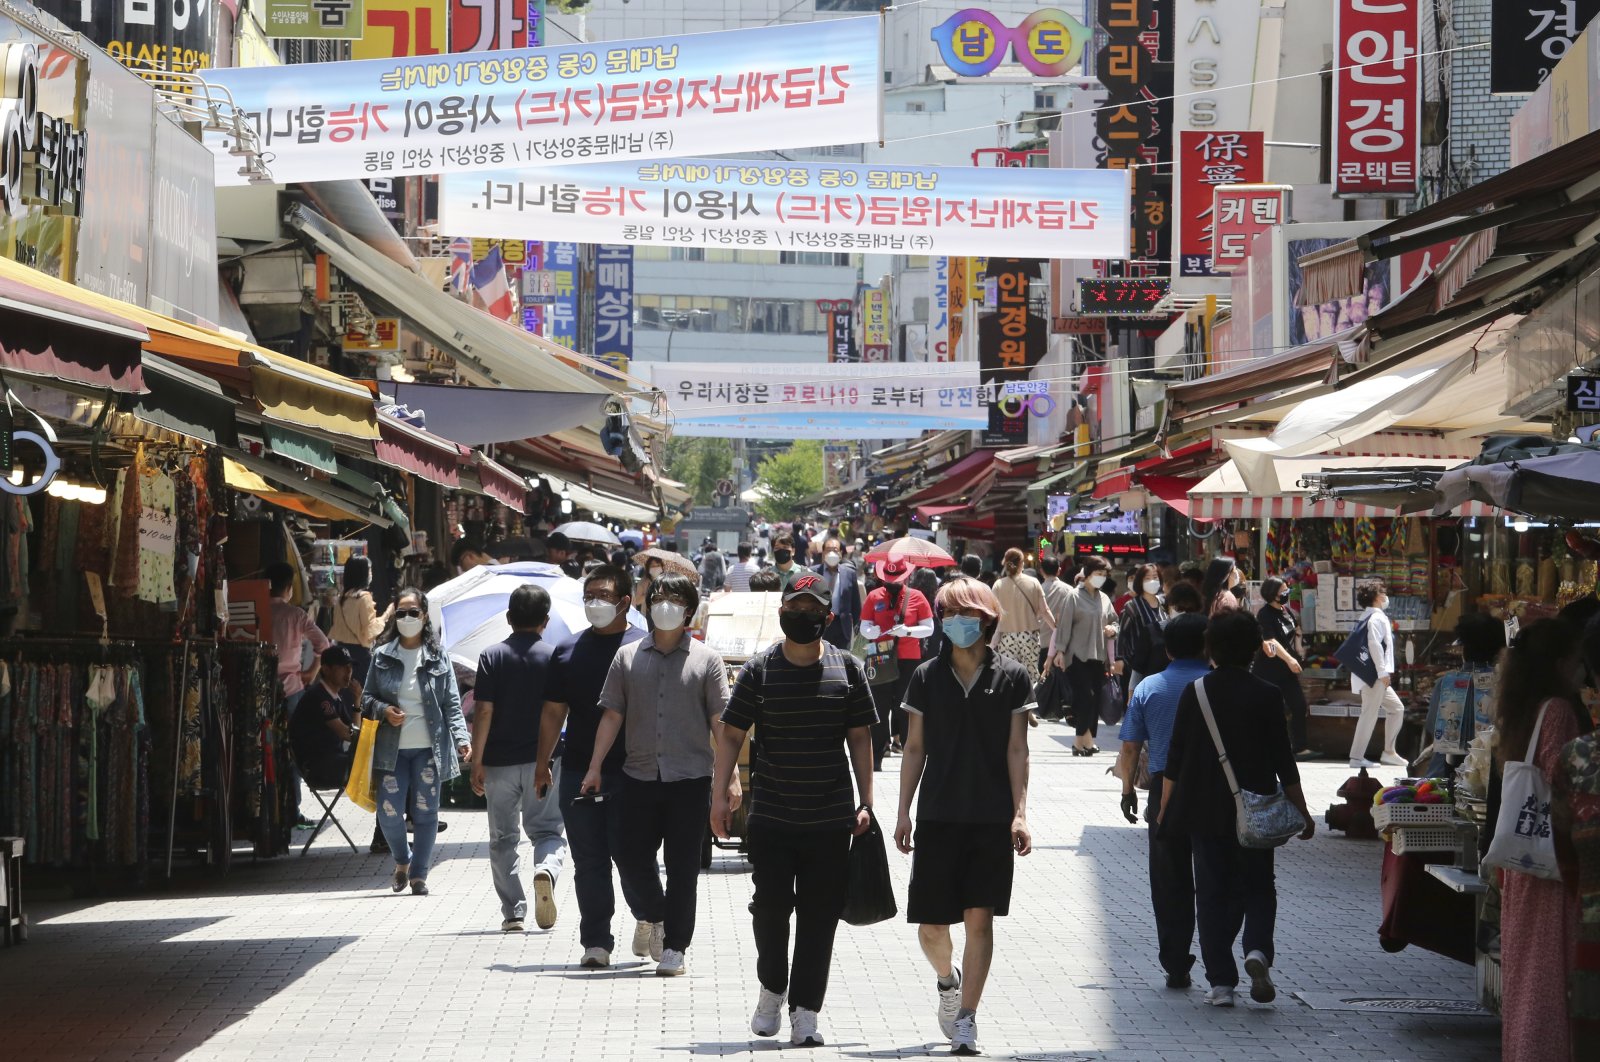 People walk in a shopping district in Seoul, South Korea, June 11, 2020. (AP Photo)